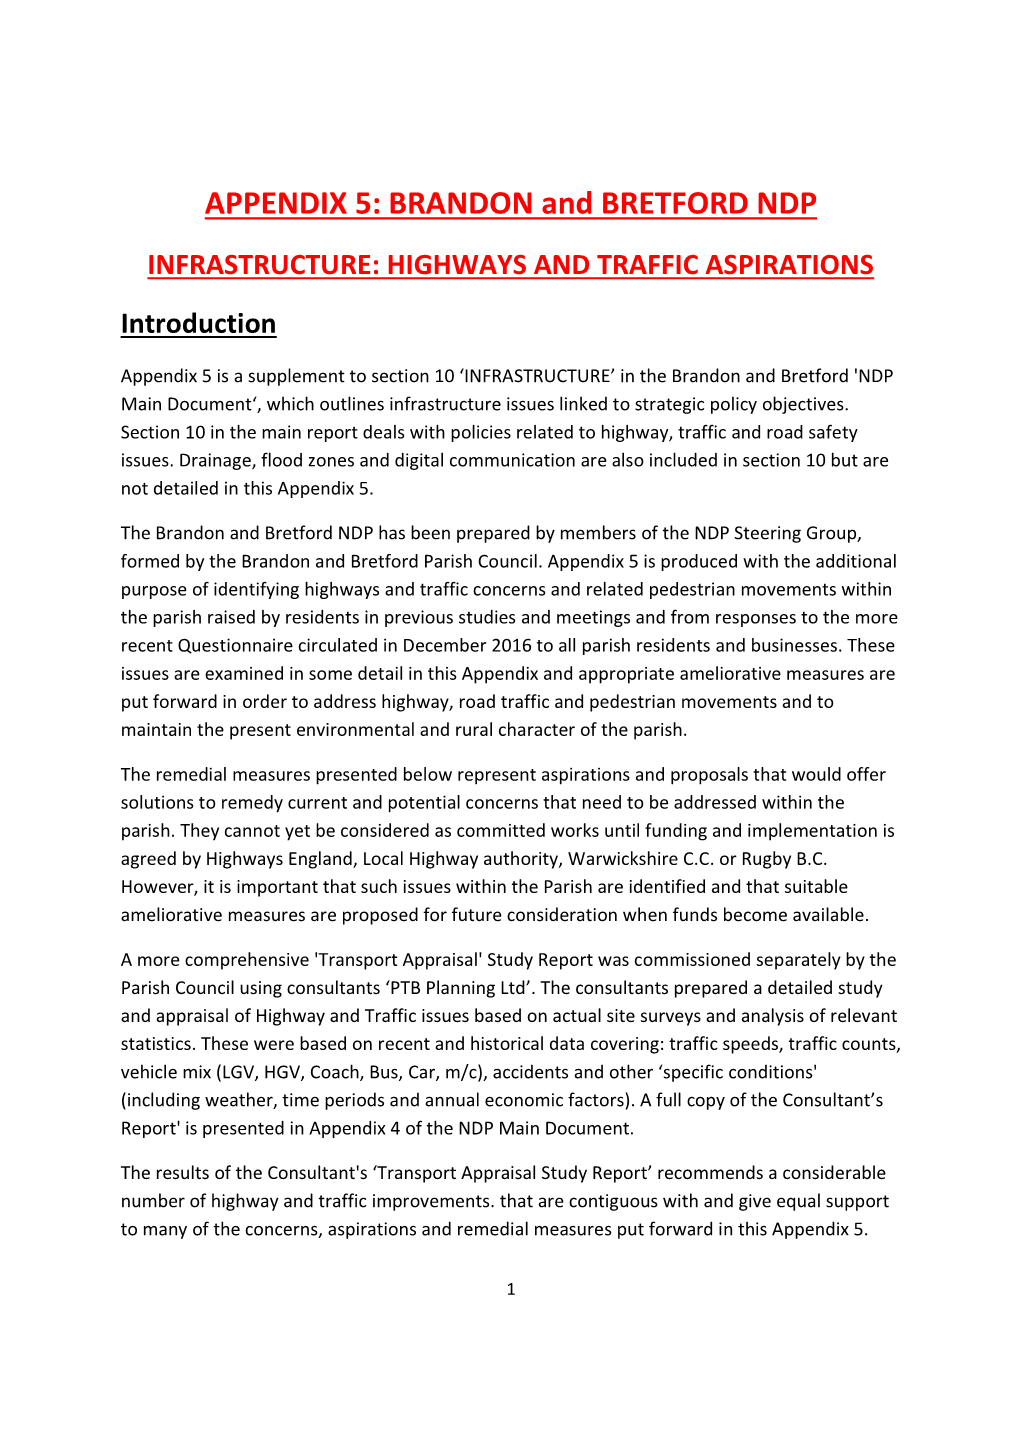 APPENDIX 5: BRANDON and BRETFORD NDP INFRASTRUCTURE: HIGHWAYS and TRAFFIC ASPIRATIONS Introduction